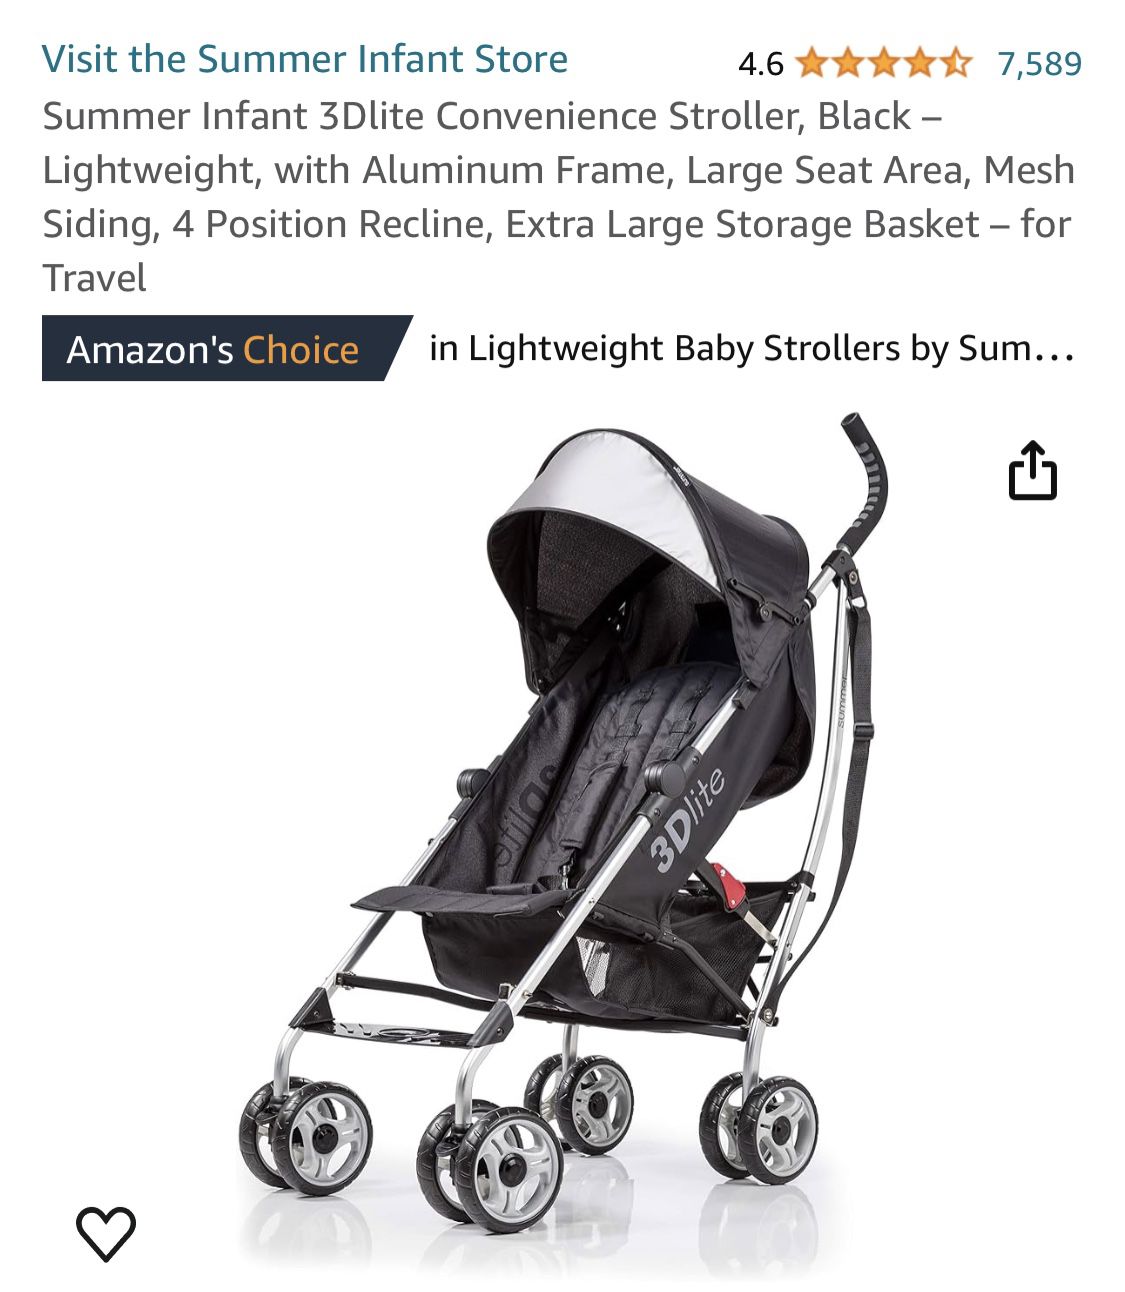 Summer Infant 3Dlite Convenience Stroller, Black – Lightweight, with Aluminum Frame, Large Seat Area, Mesh Siding, 4 Position Recline, Extra Large Sto